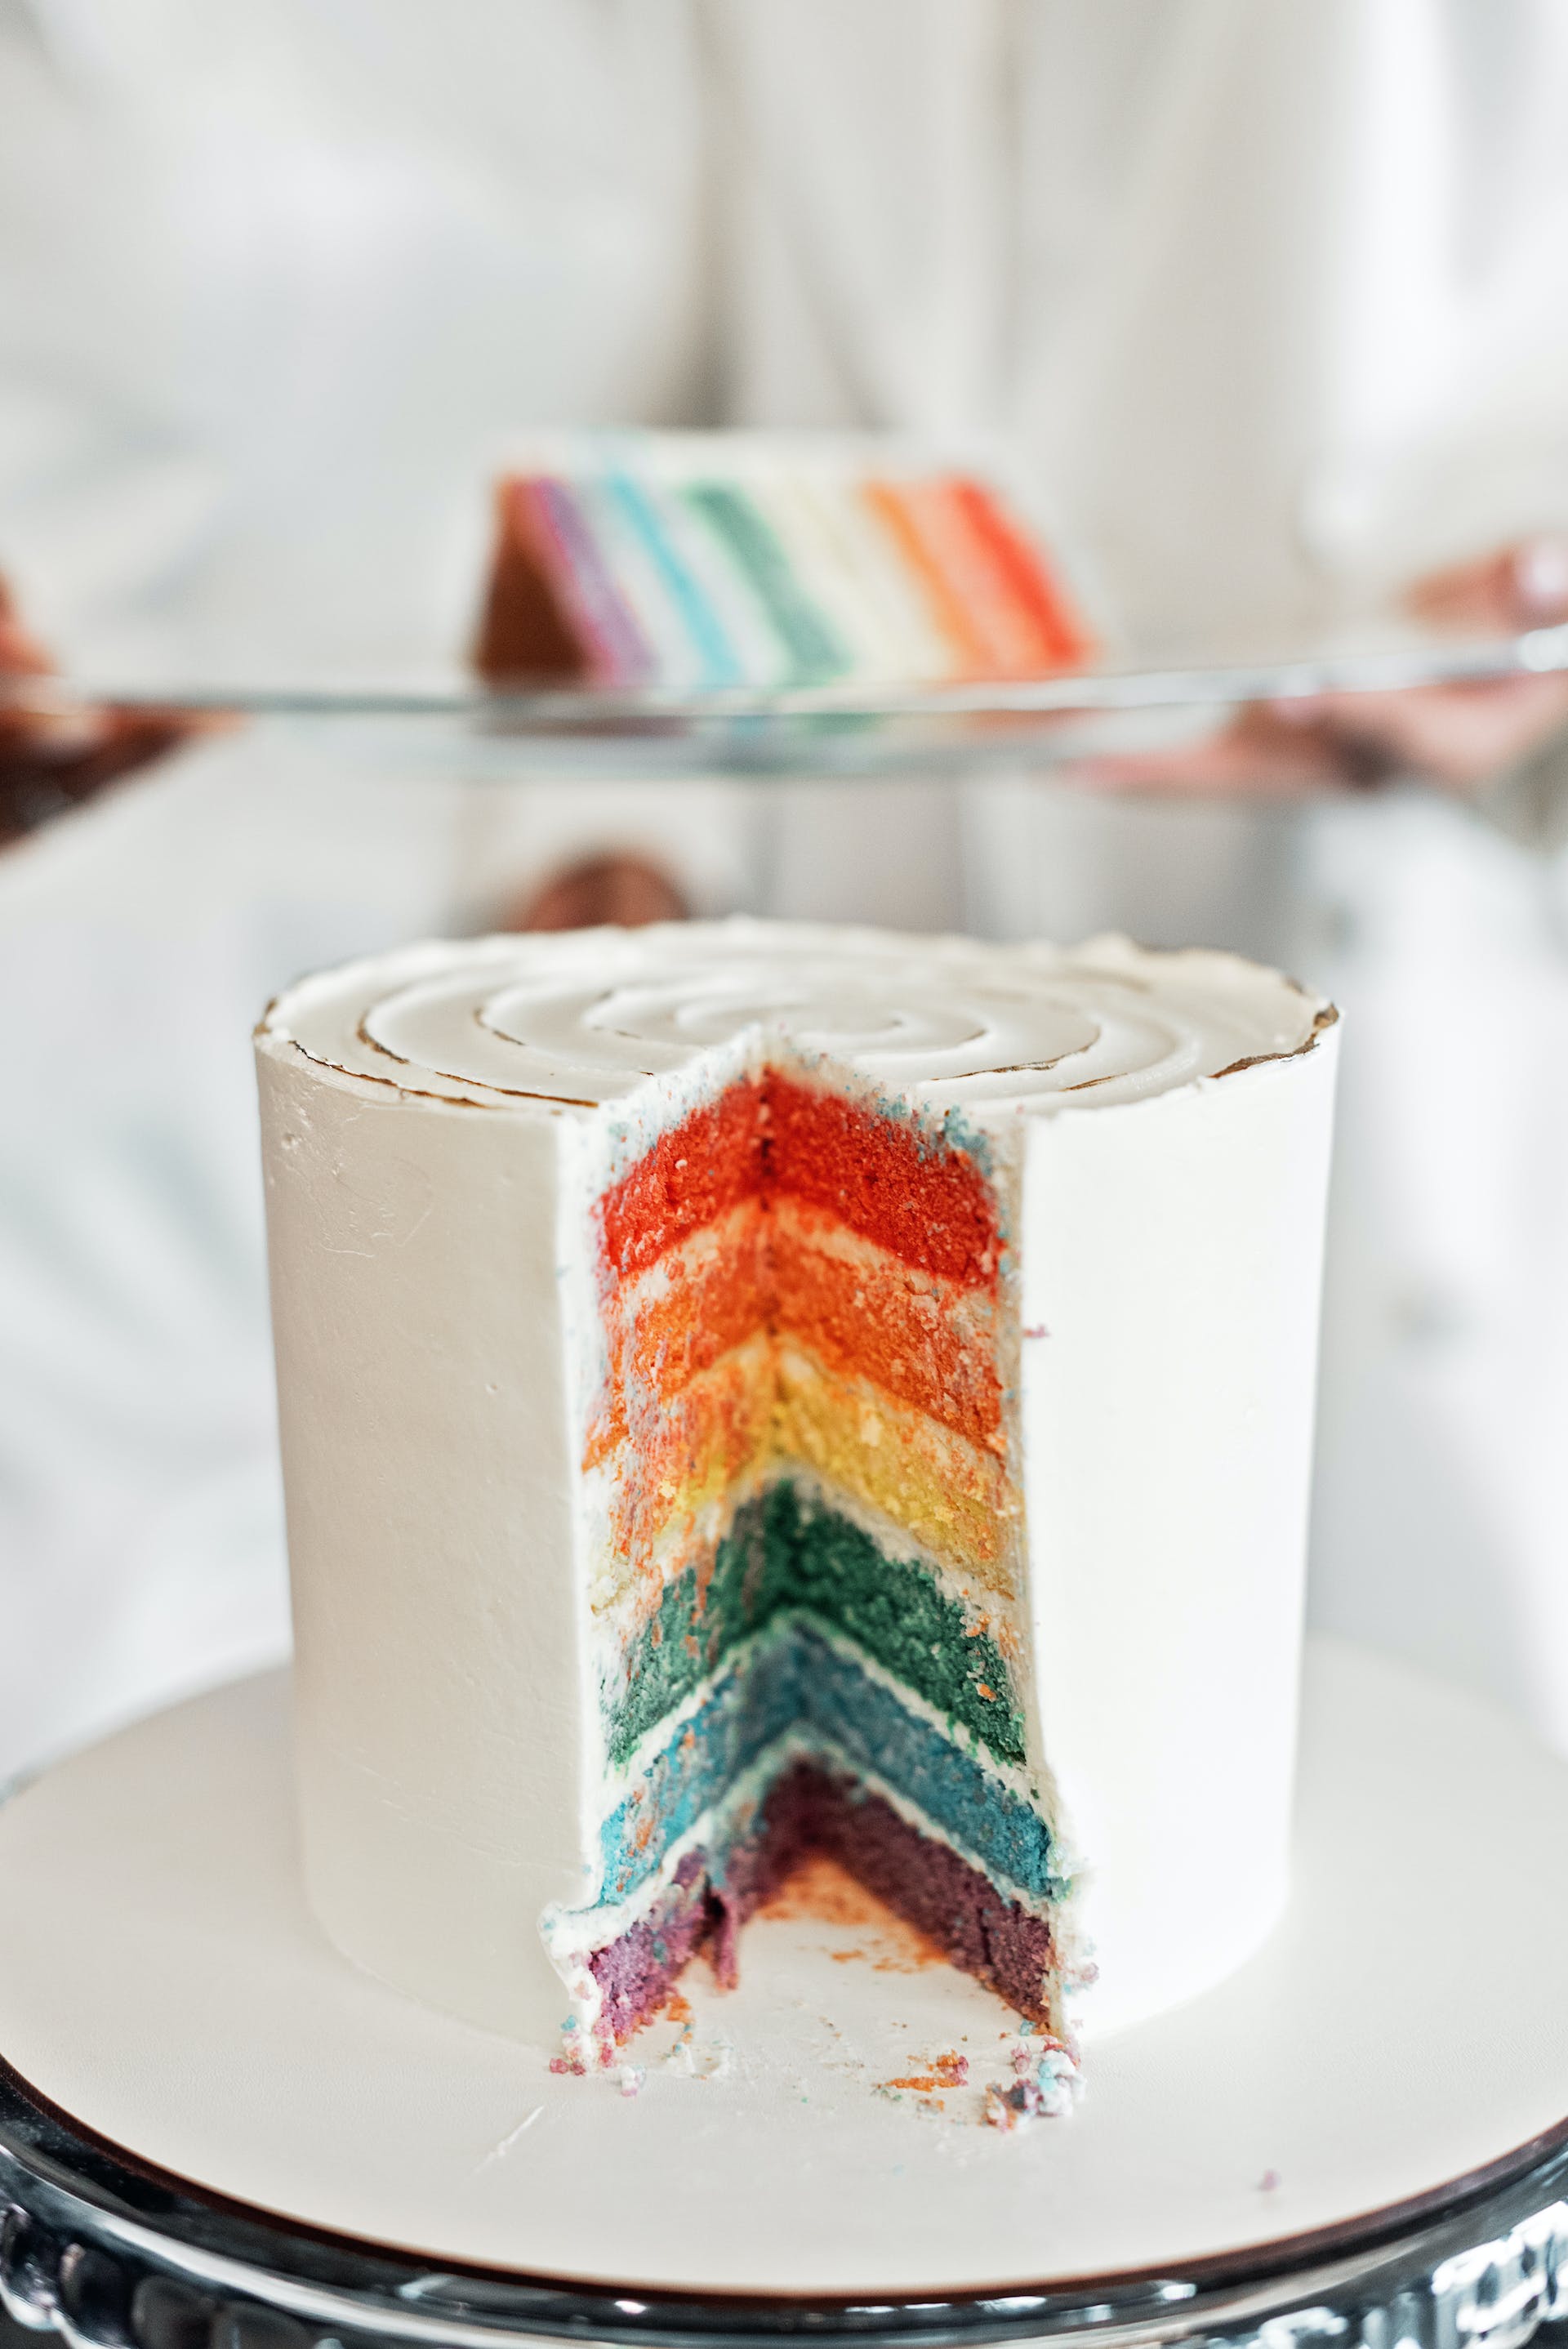 A tall cake with colorful layers | Source: Pexels